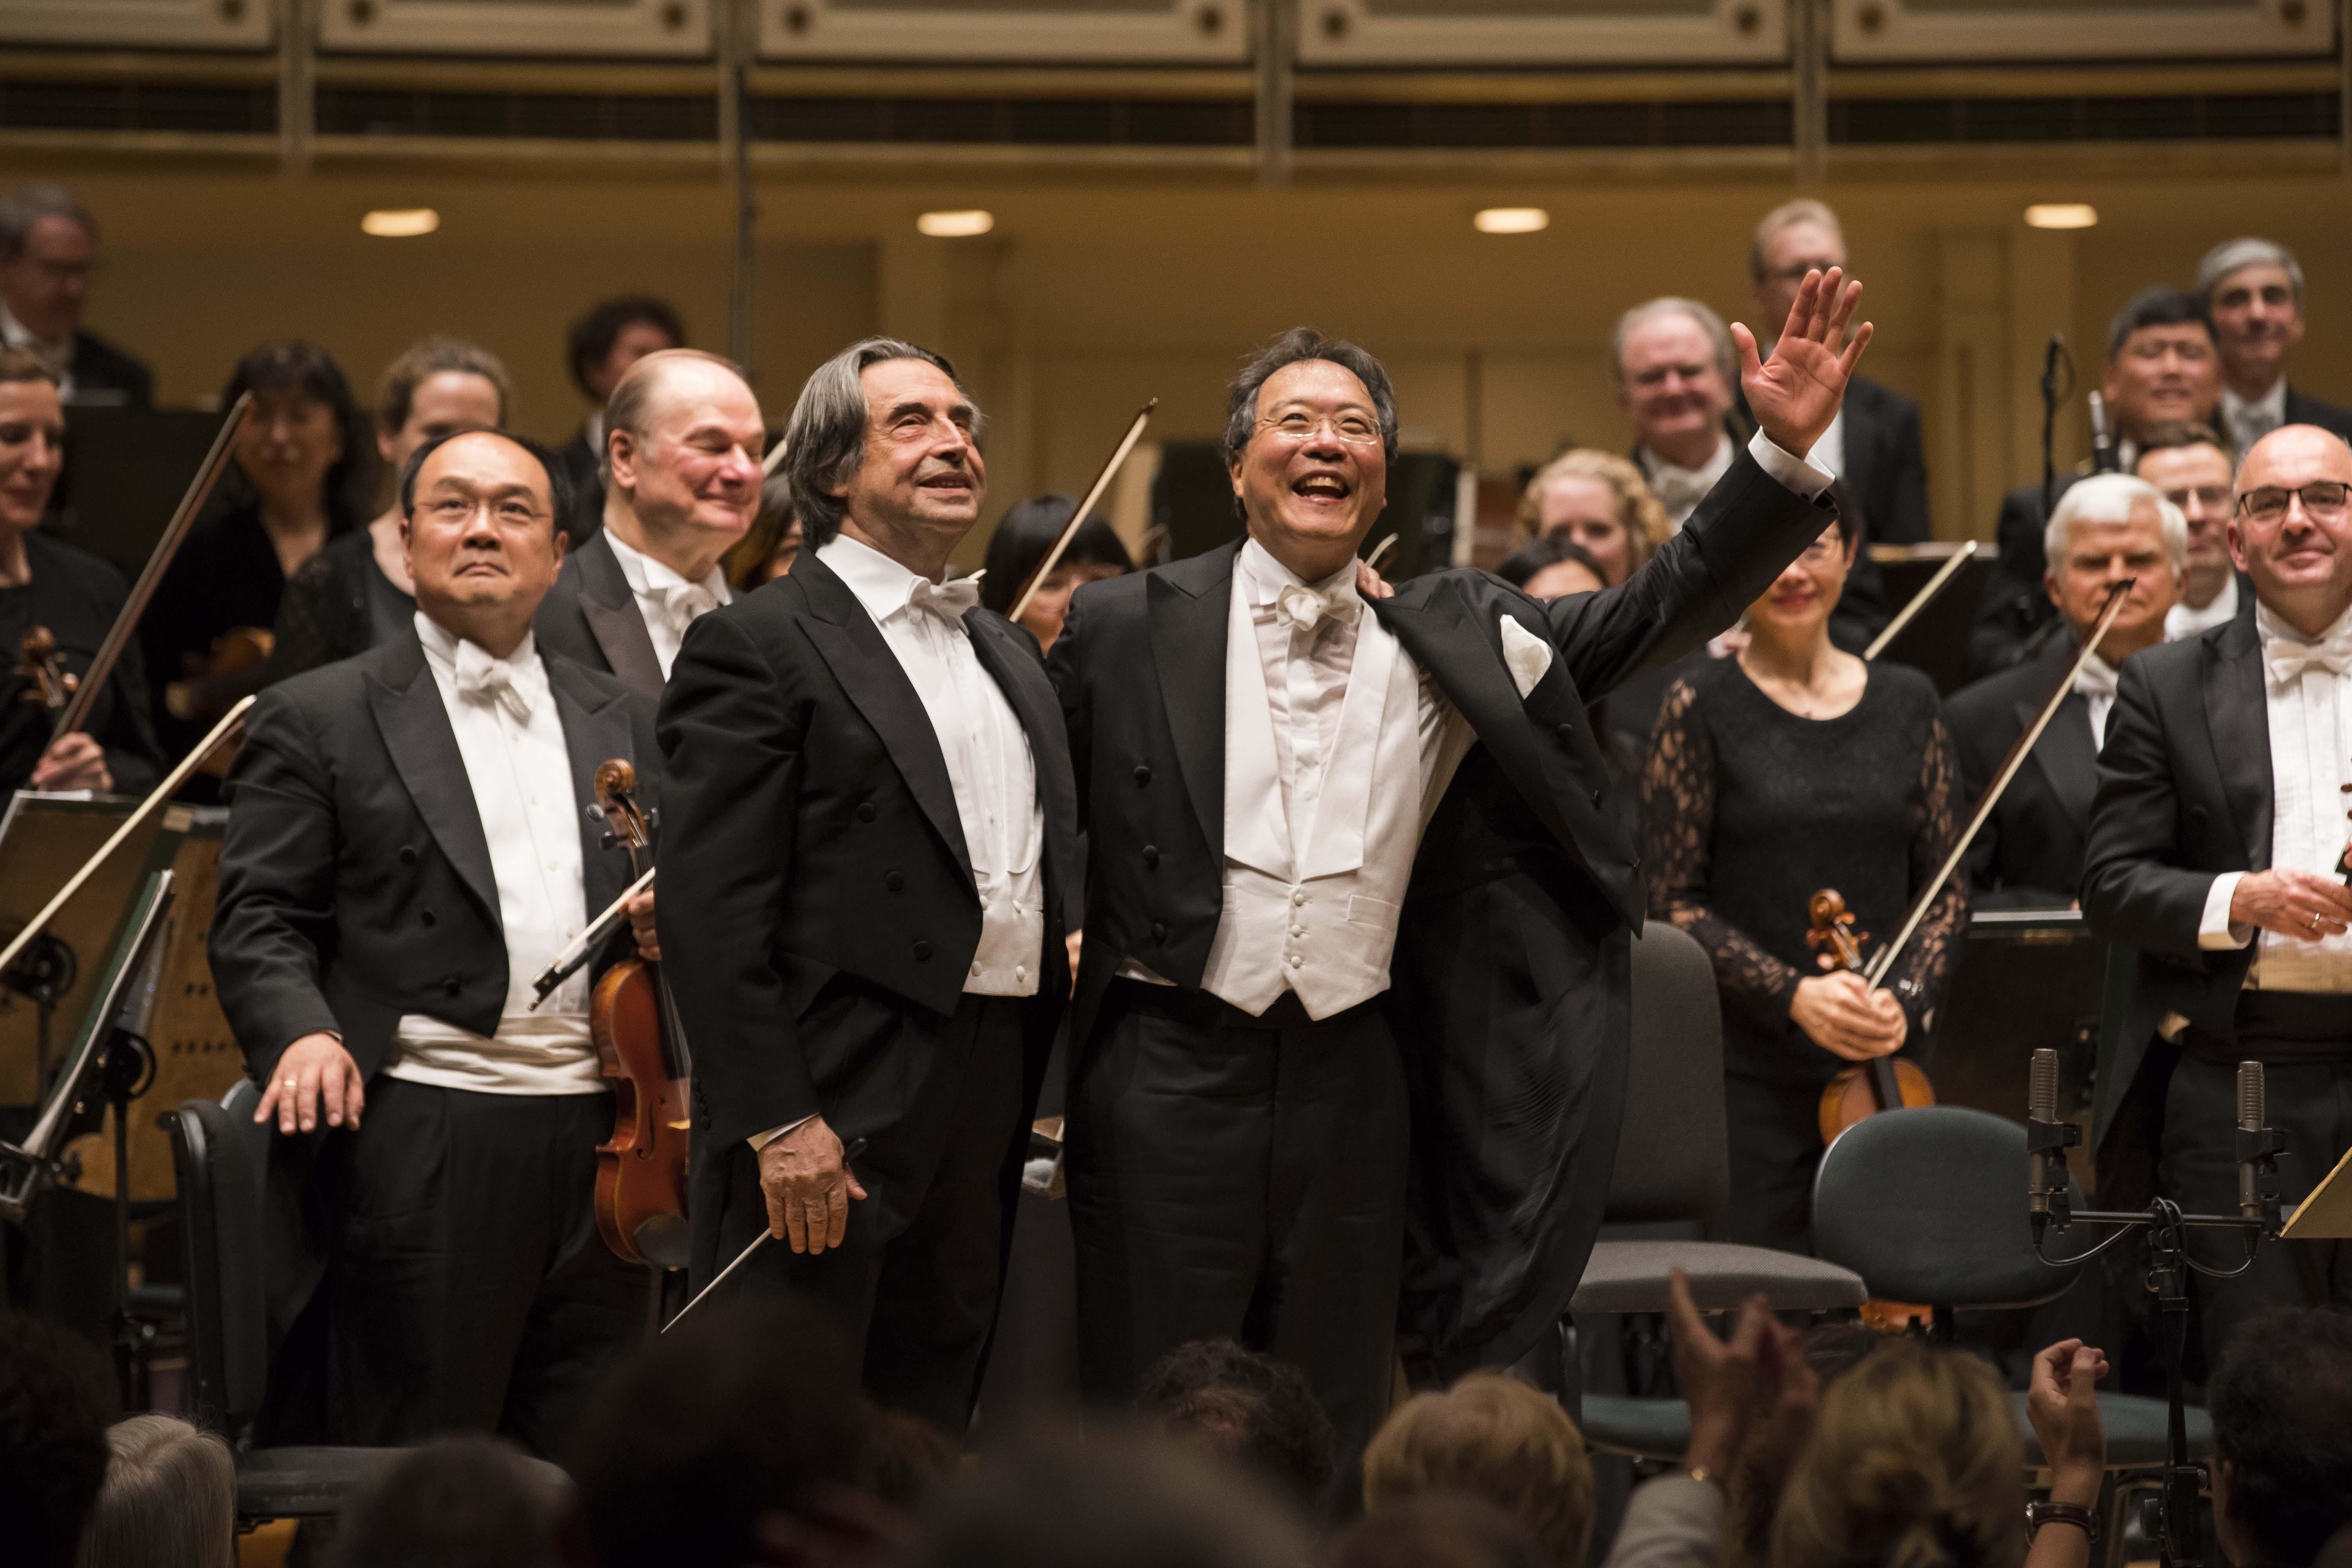 Music Director Riccardo Muti and cellist Yo-Yo Ma acknowledge the audience following their performance of Shostakovich’s Cello Concerto No. 2 with the CSO. (Credit: Todd Rosenberg Photography)